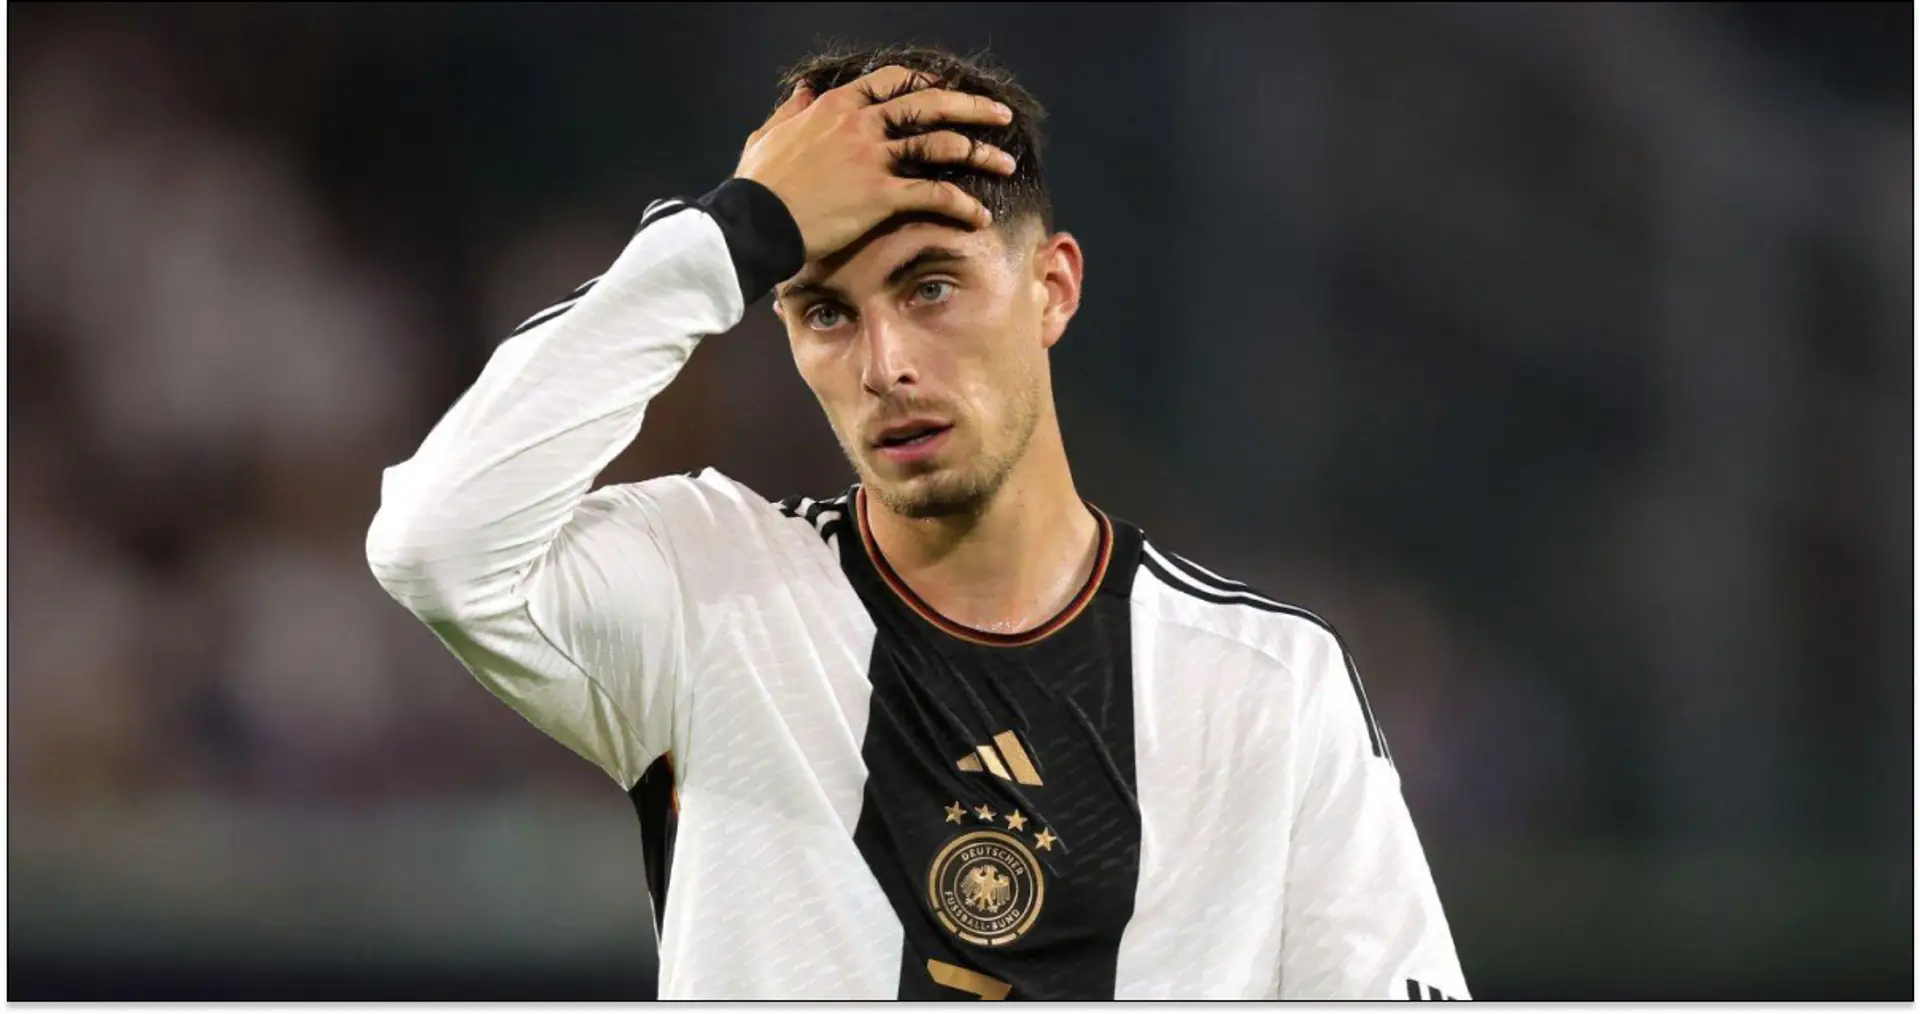 Germany suffer 4-1 defeat v Japan with Havertz at no. 9